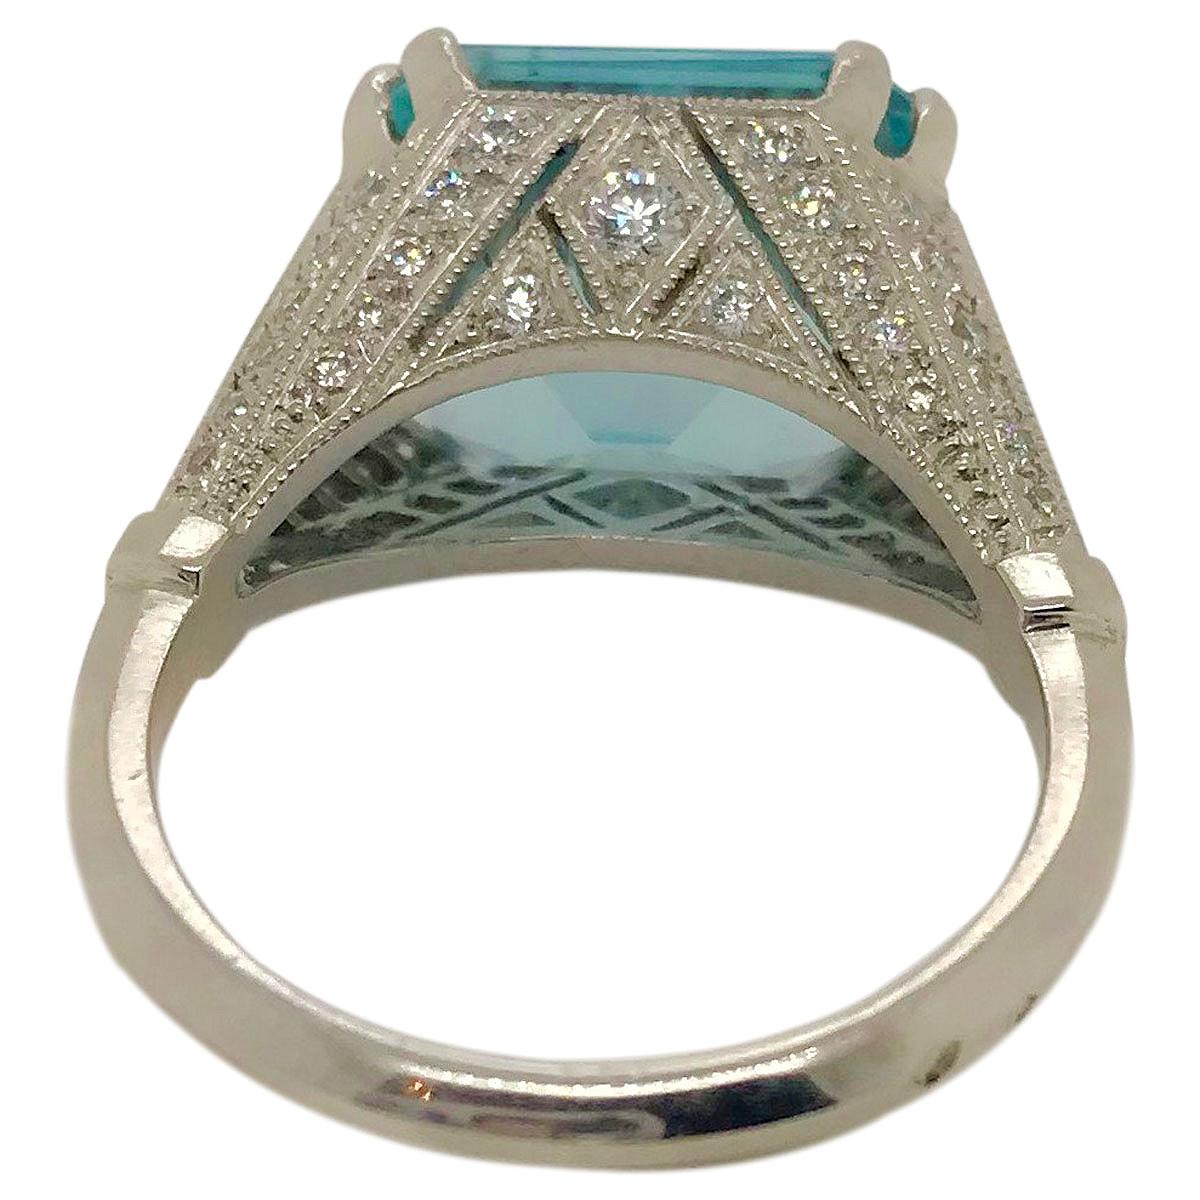 This ring is totally dreamy, the most beautiful Aquamarine ring I have ever seen - and that's no exaggeration! 
The centrepiece is a fabulous 7.57ct blue/green aquamarine, it is hard to describe the colour as it looks different in different light